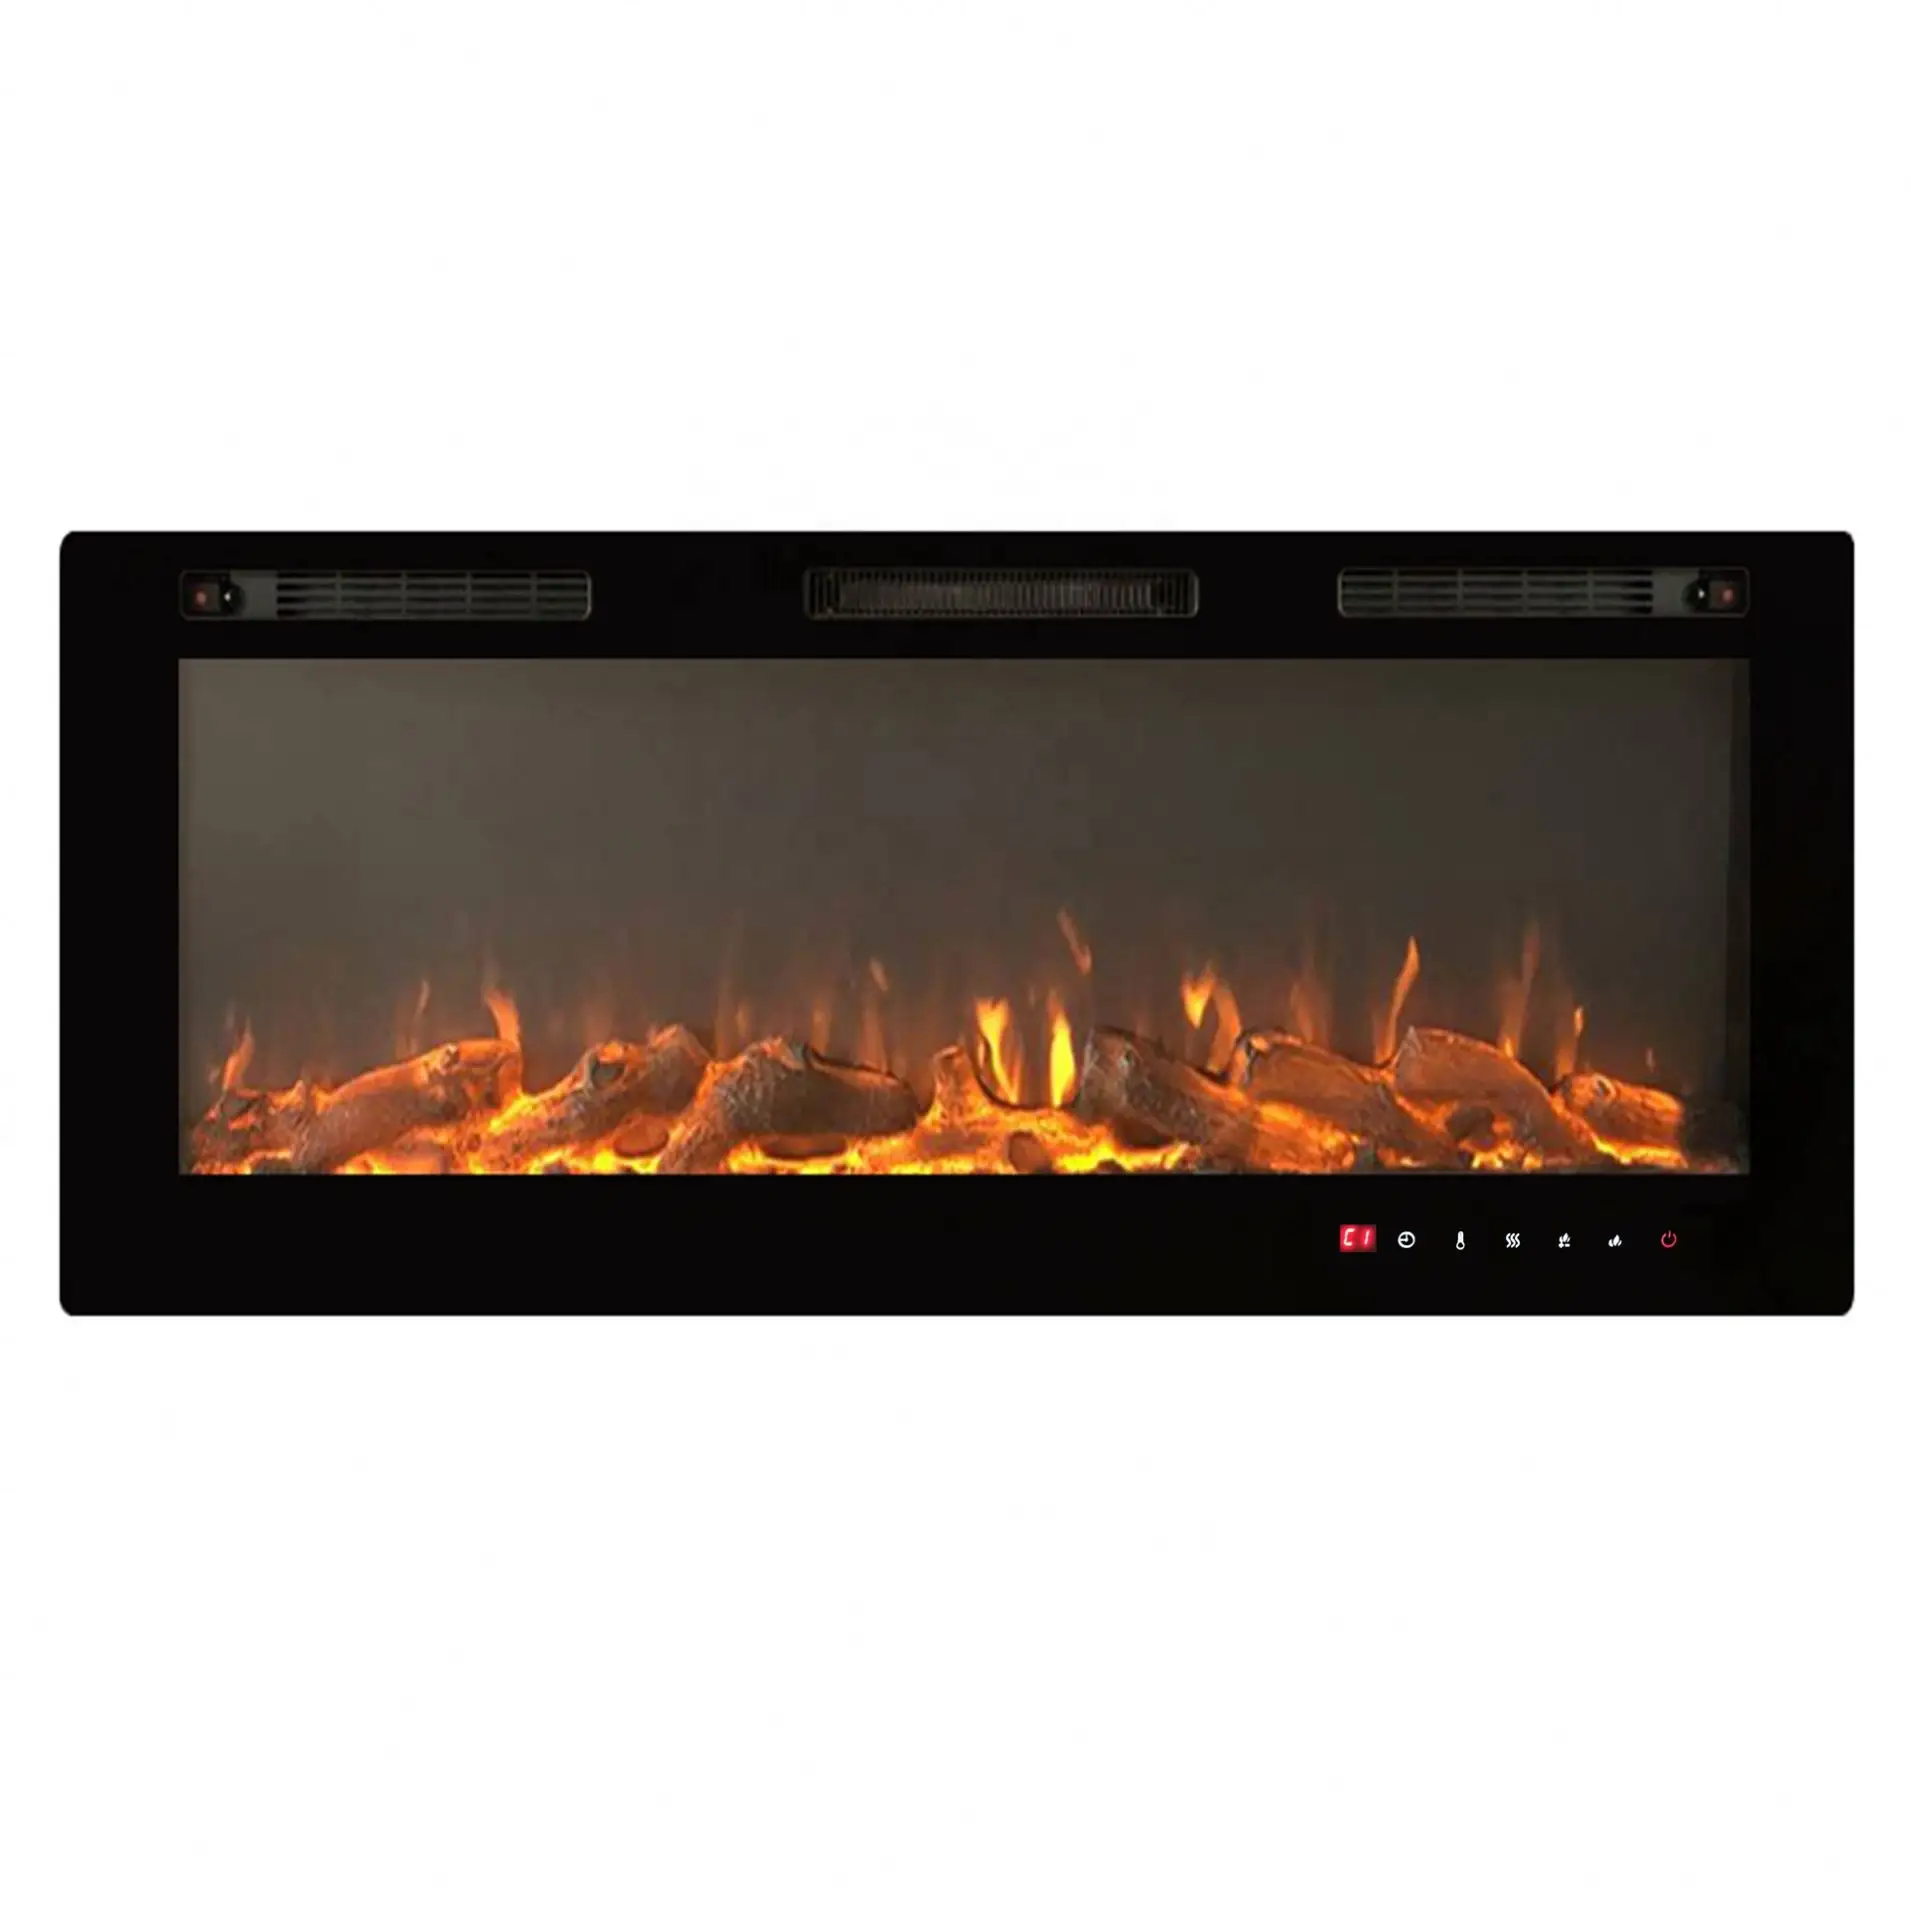 50 INCH WALL MOUNTED INSERTED FREESTANDING FIREPLACE WITH WIFI CONTROL & BLUE TOOTH SPEAKER